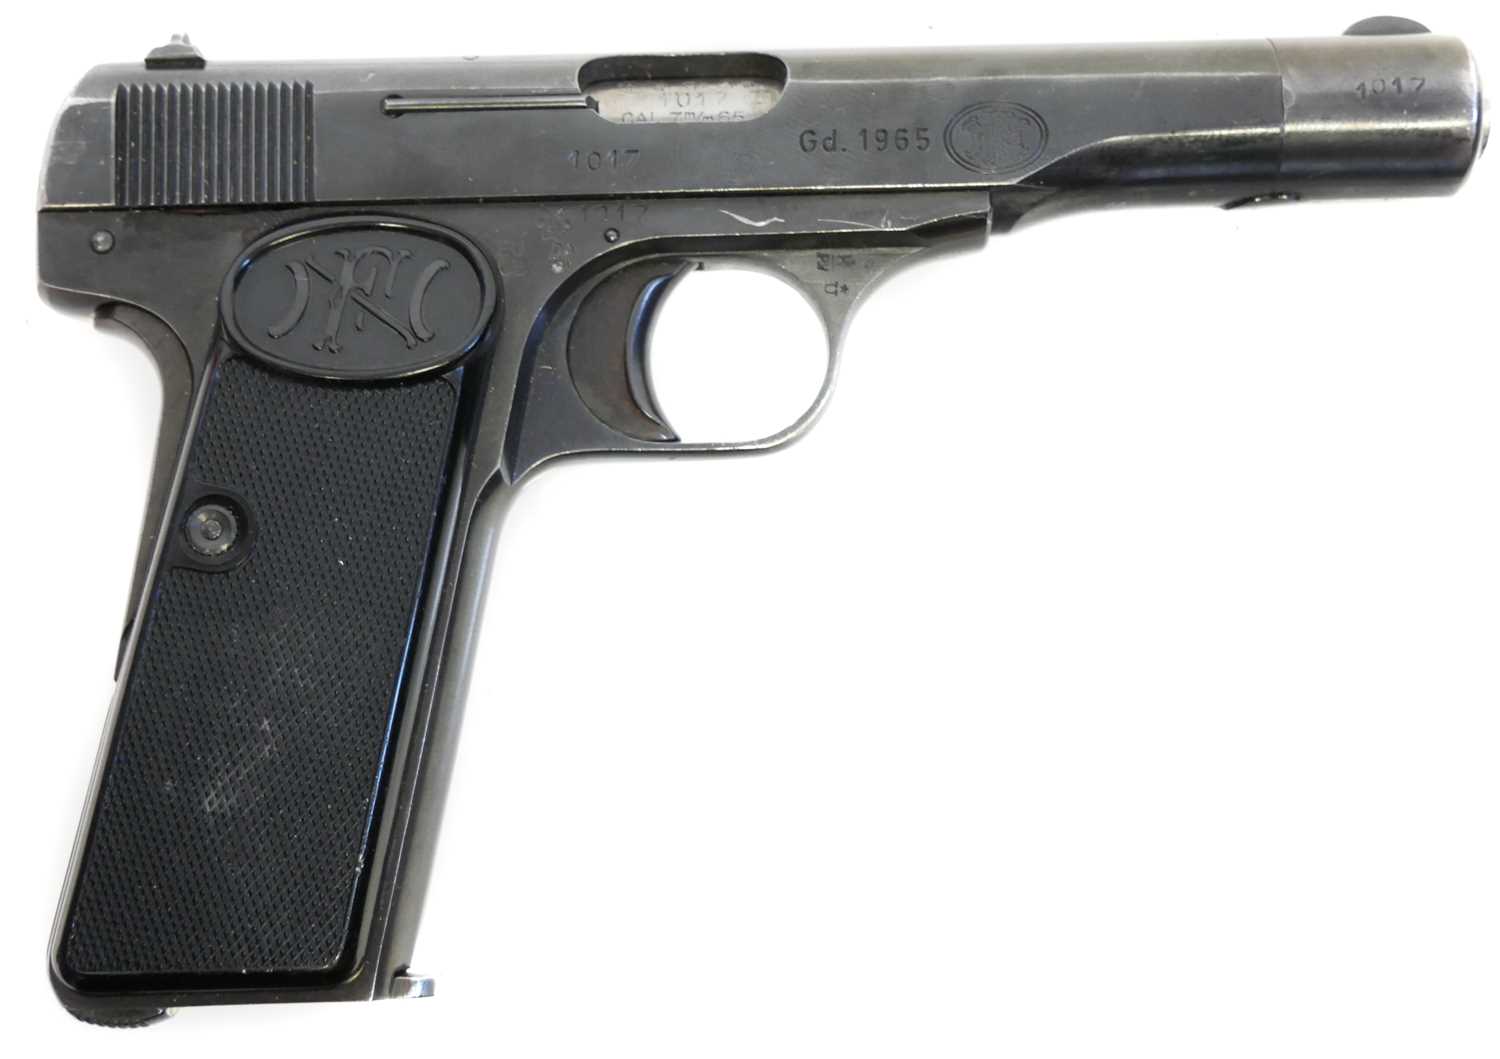 Deactivated FN Browning 1922 semi automatic pistol